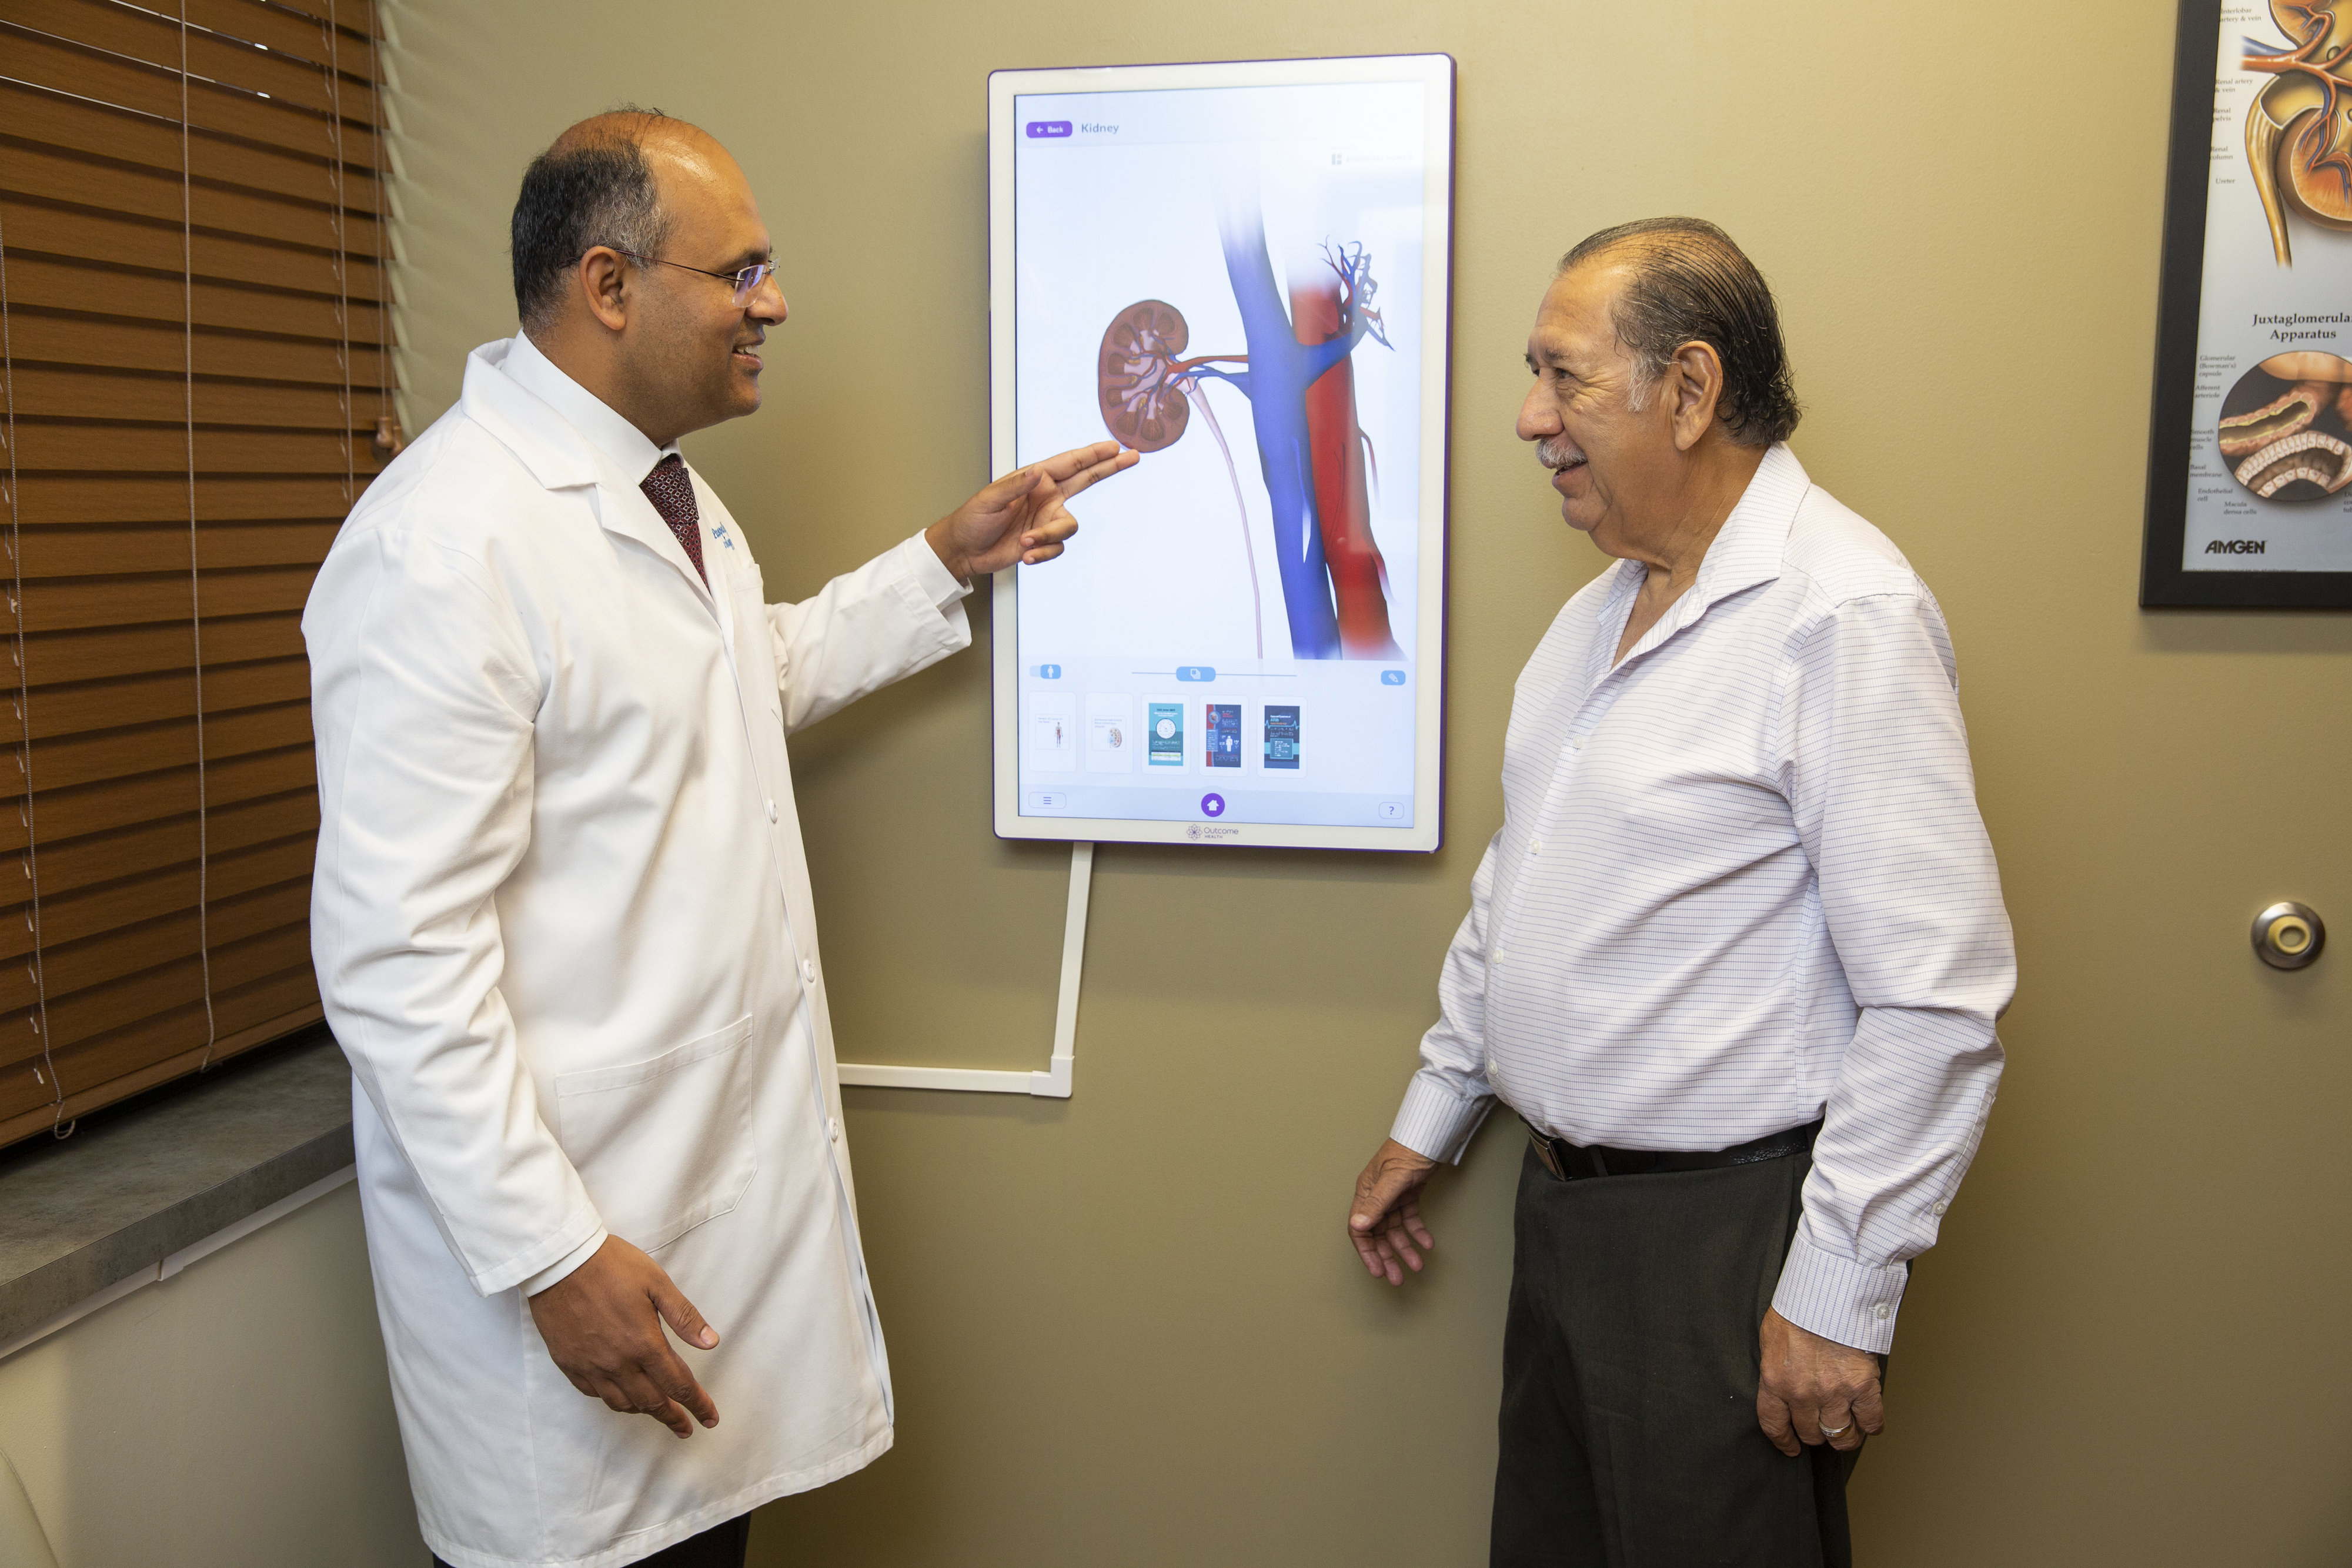 Male doctor on the left speaking with a male patient on the right, pointing to a kidney diagram on the wall.